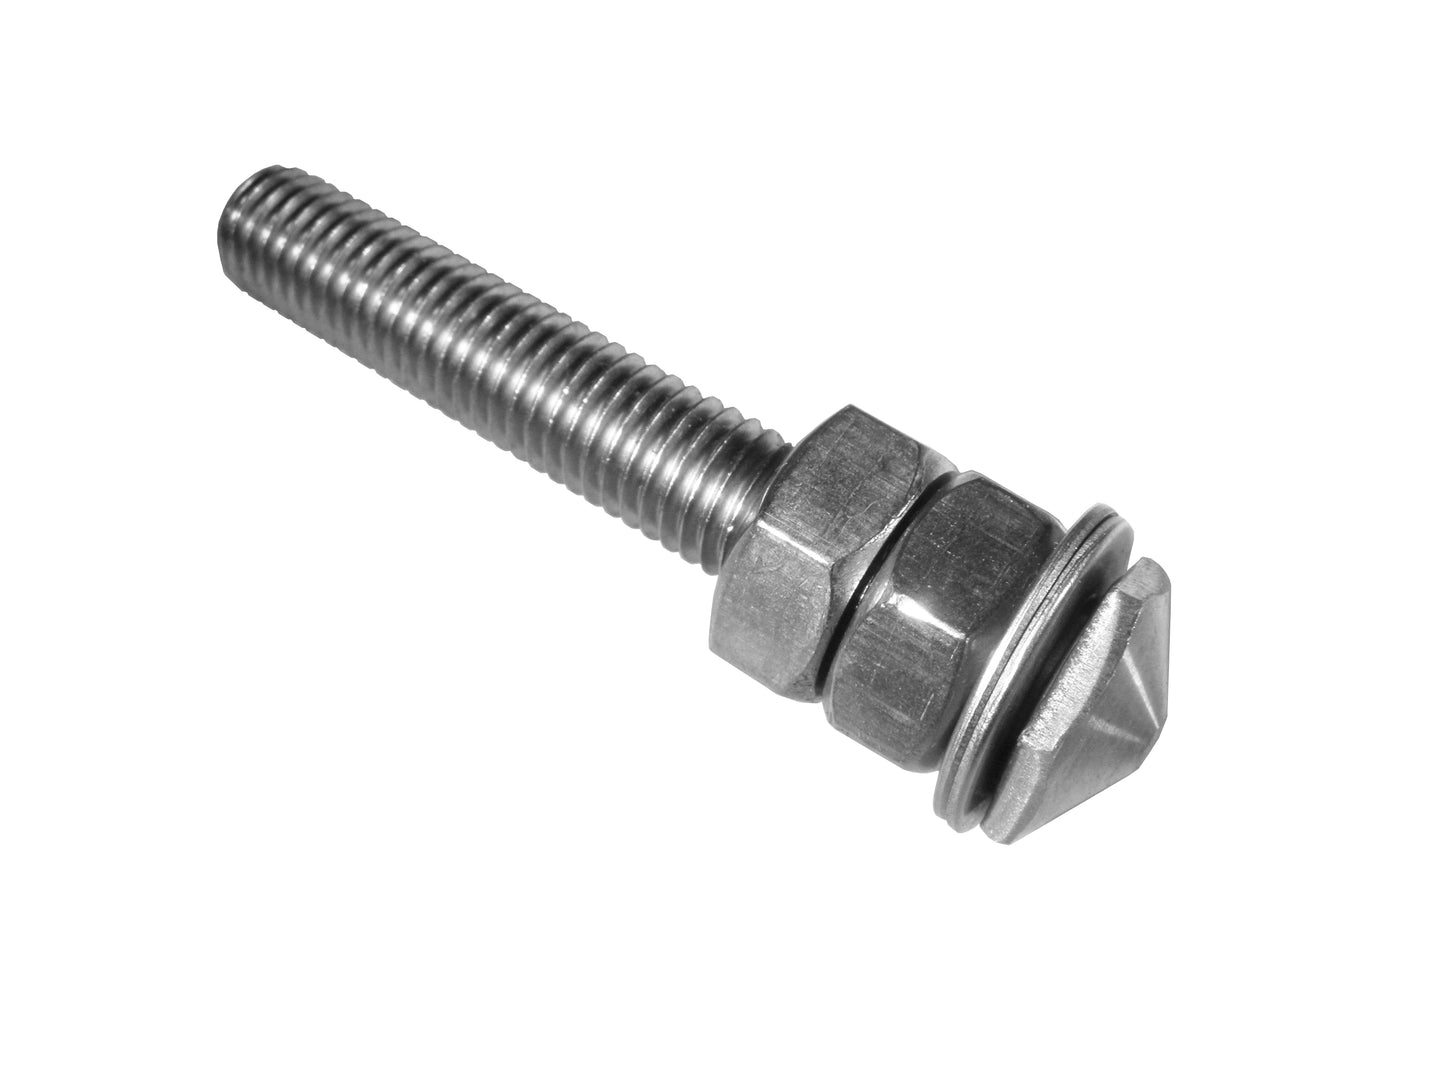 Bolt w/Nuts & Washers, for Almond Flange Clamp, KC6285